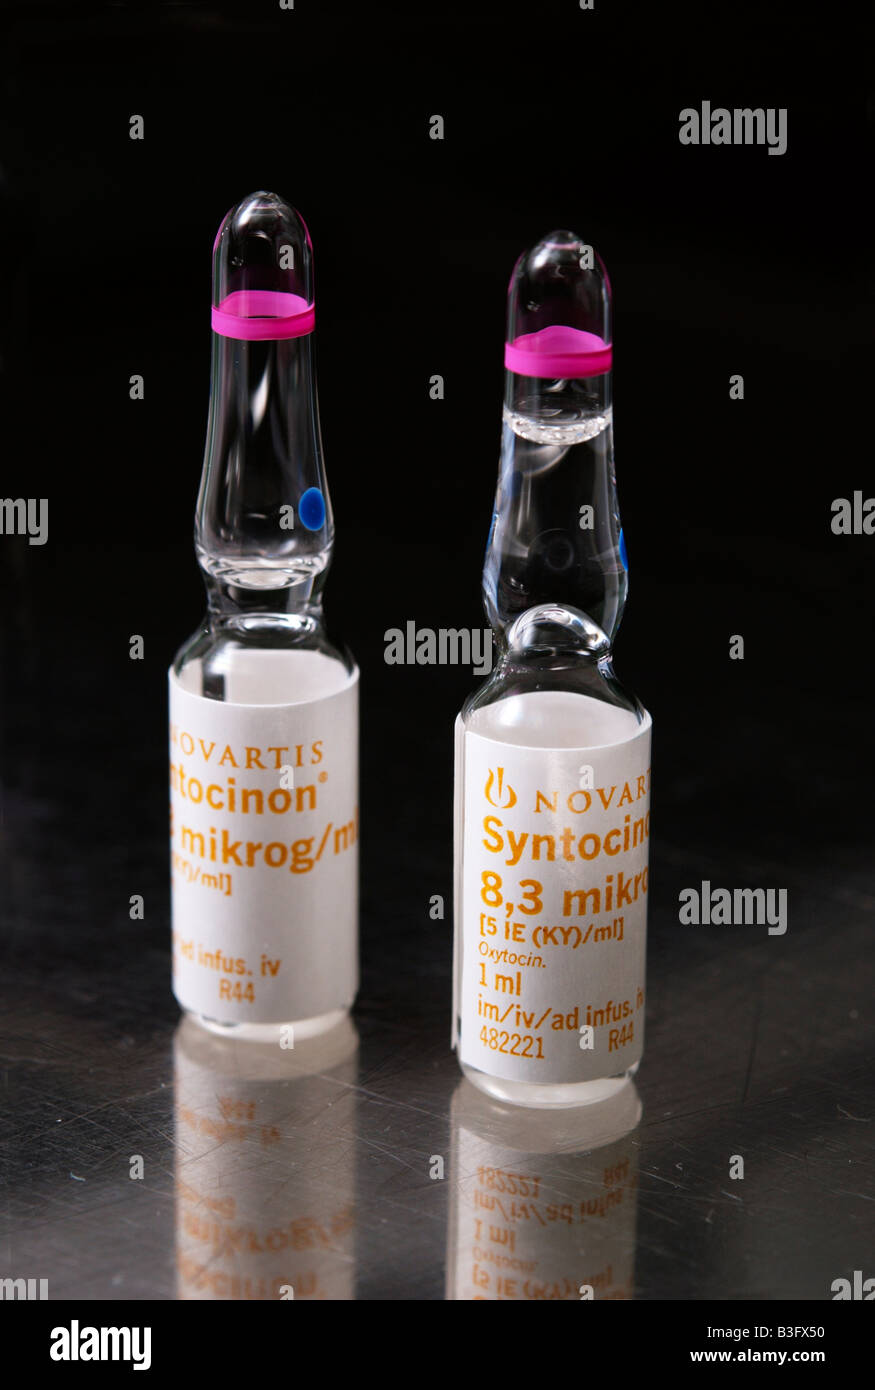 Ampoules of Syntocinon (oxytocin) drug widely used for augmentation of labor and reducing obstetric bleeding complications Stock Photo